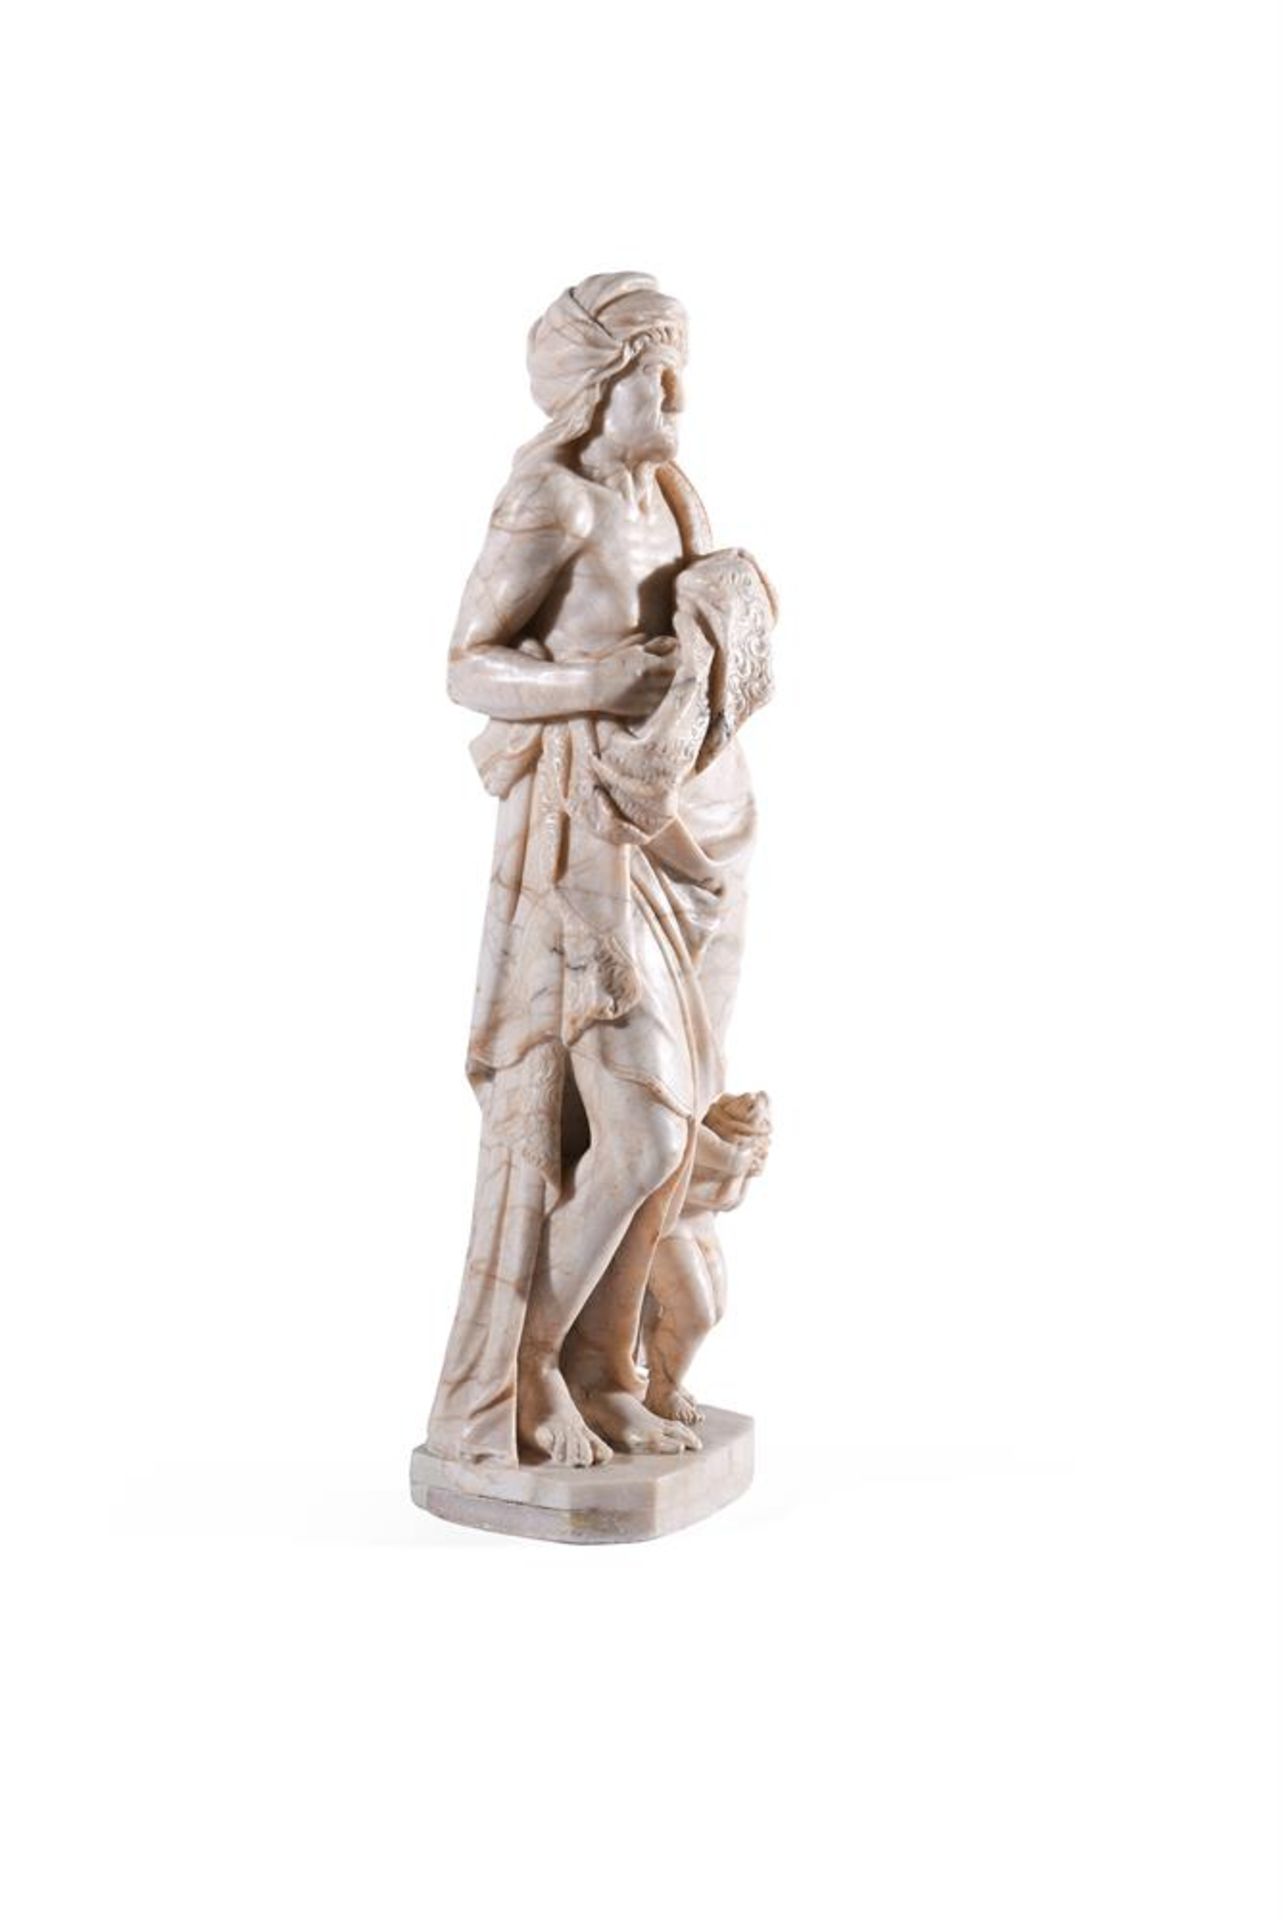 A GERMAN ALABASTER ALLEGORICAL FIGURE OF WINTER AS AN OLD MAN, 17TH CENTURY - Image 3 of 3